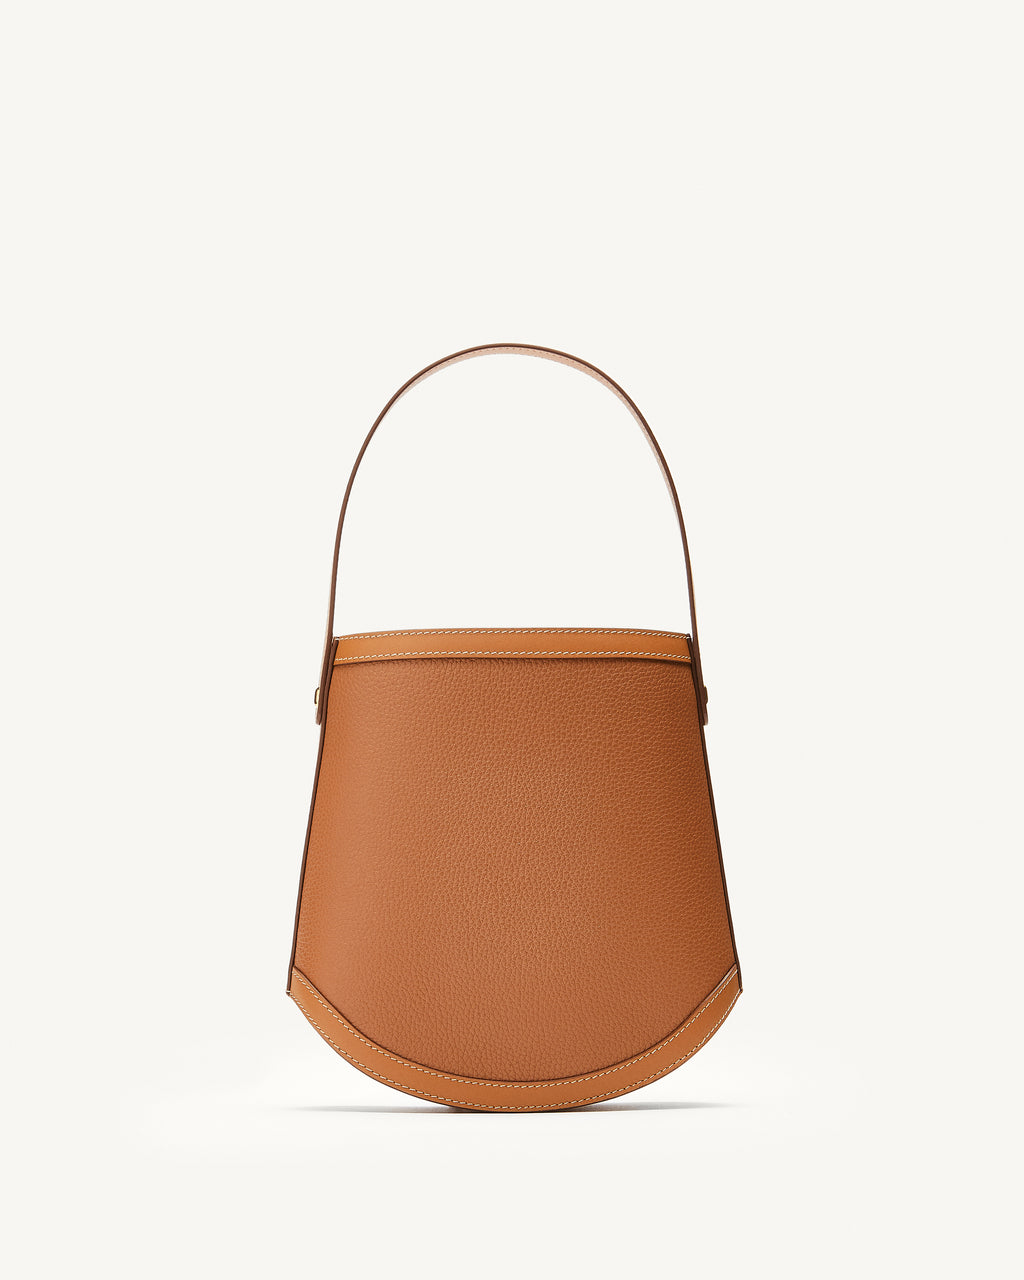 Bucket in Saddle Mixed Leathers